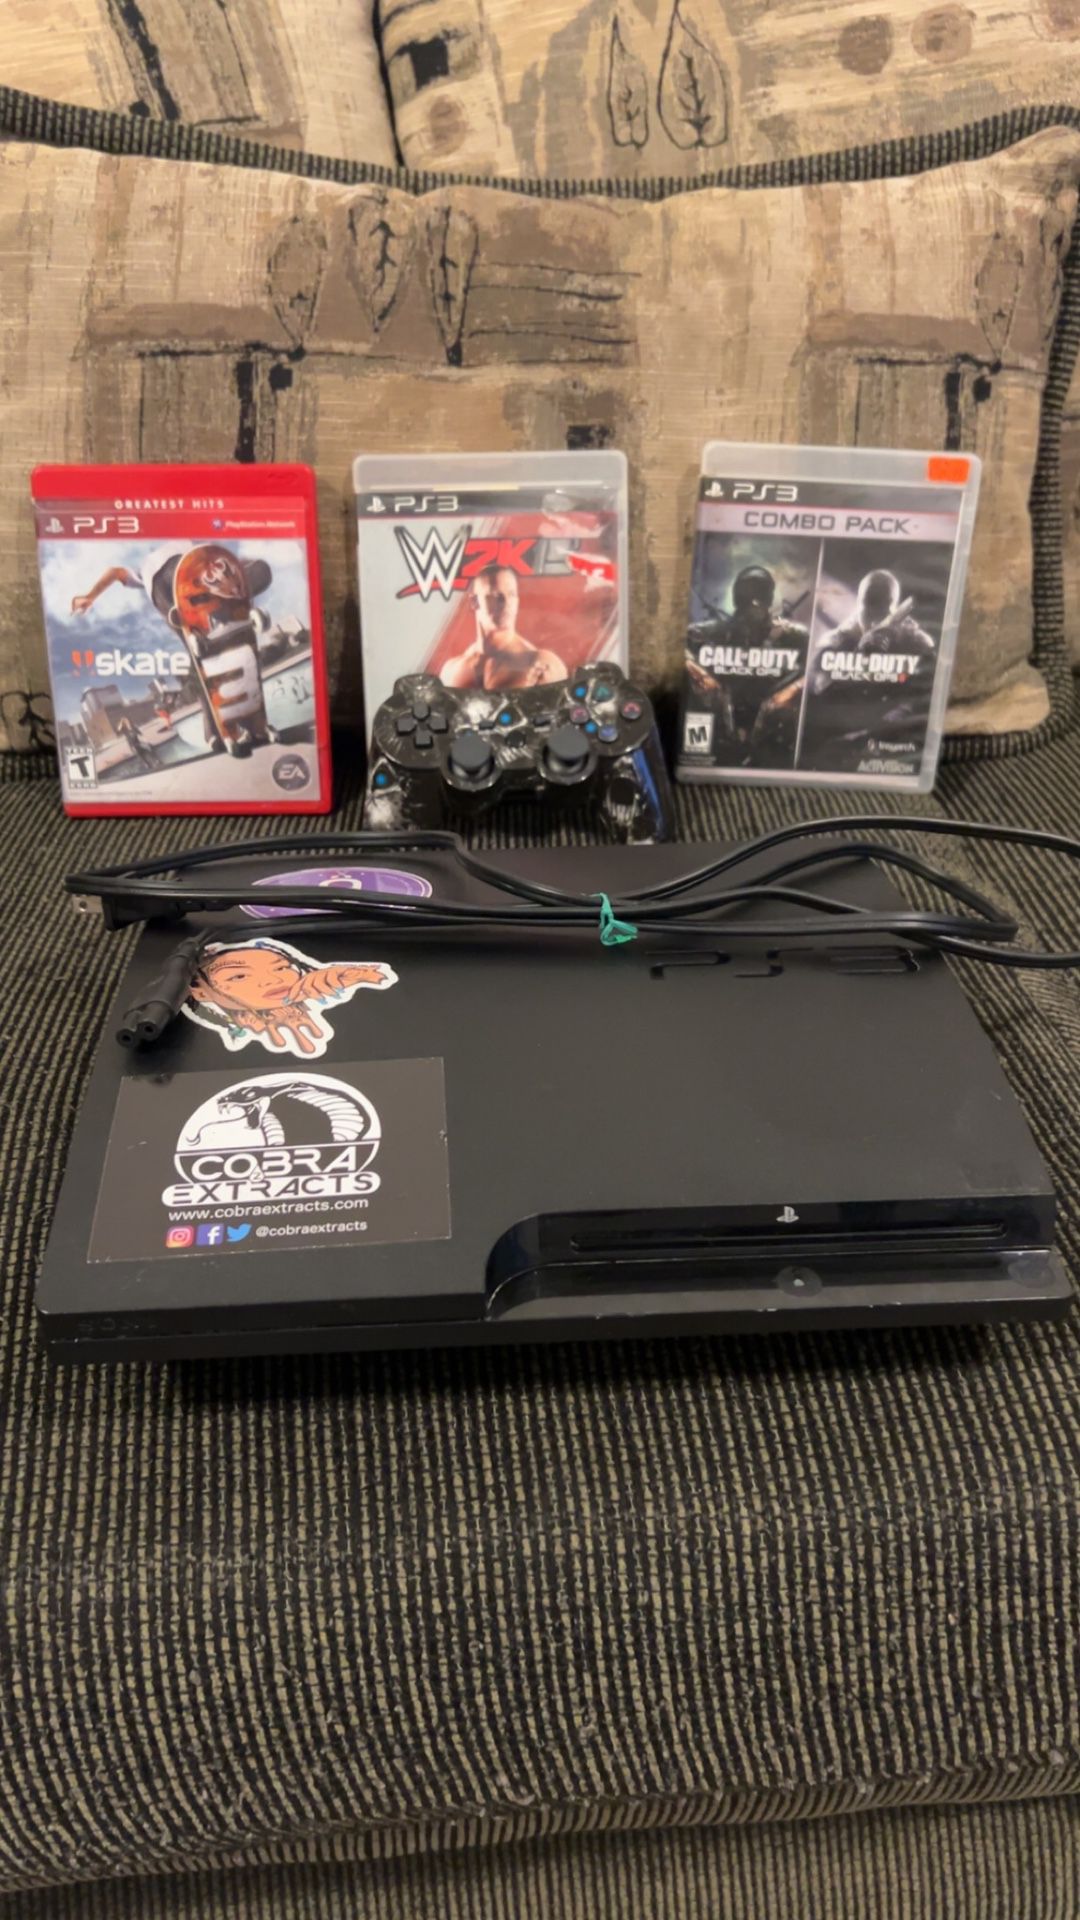 PS3 W/ 4 Games, Controller And Power Chord $60!